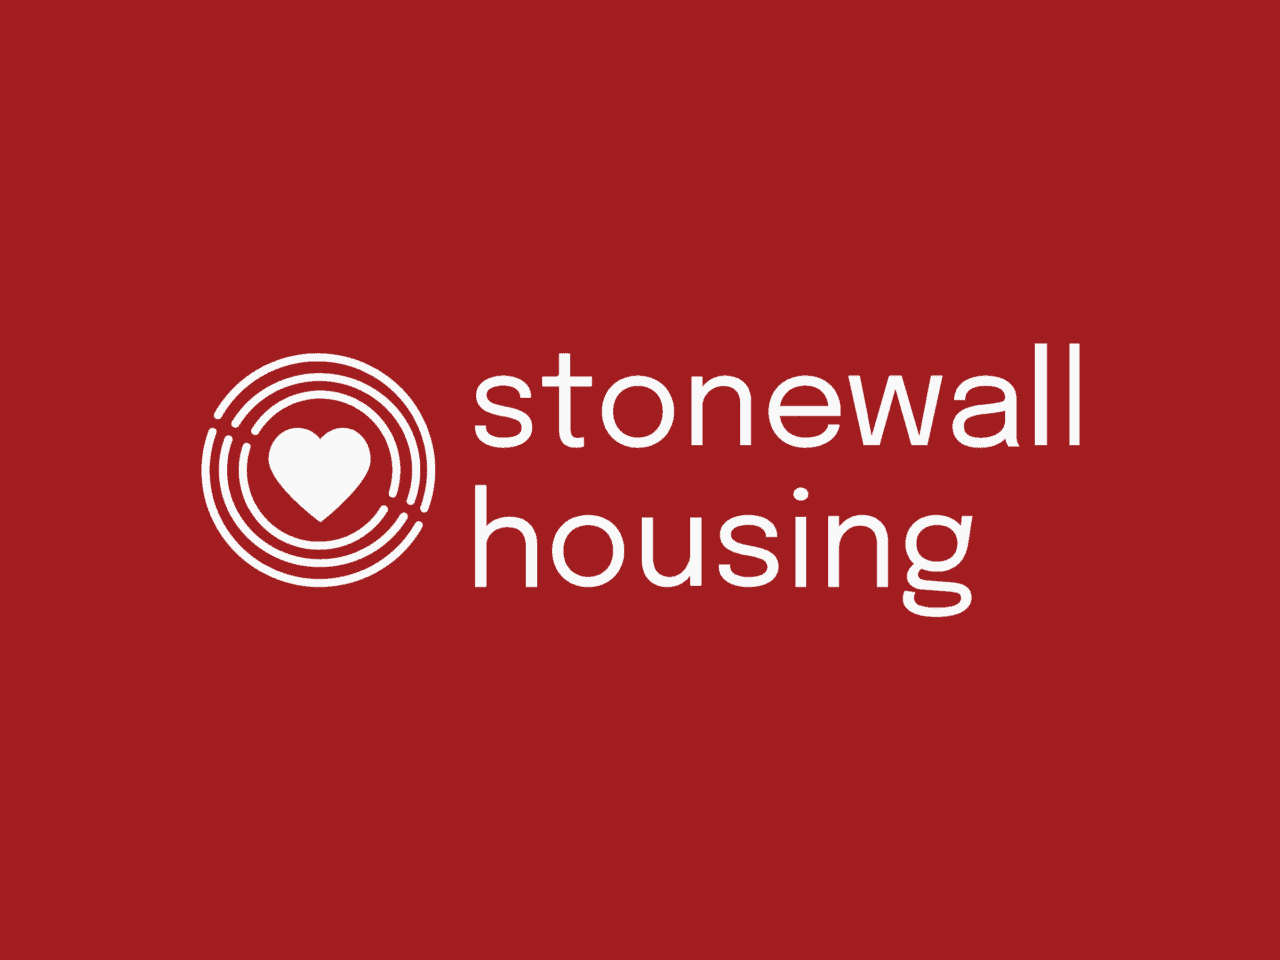 Stonewall Housing logo on a bright red background